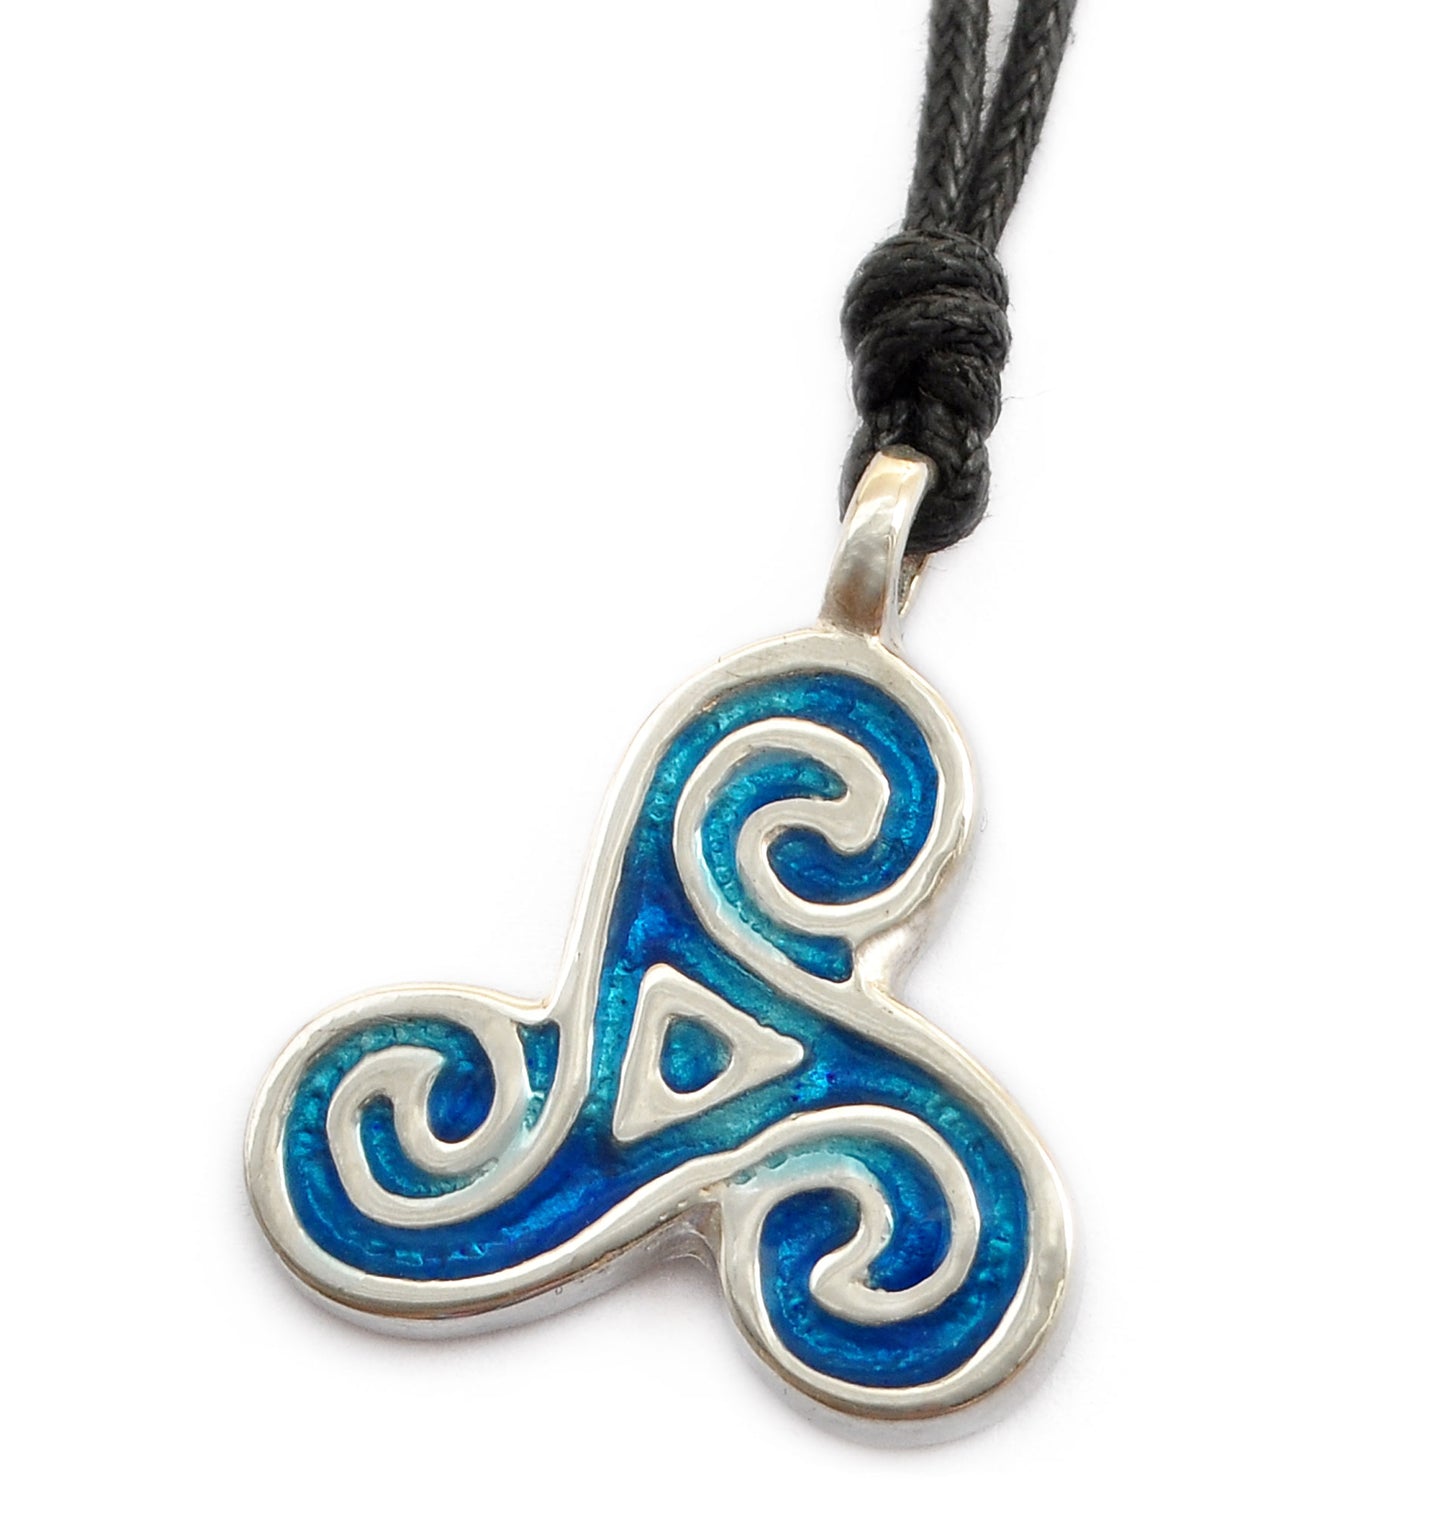 Colorful Celtic Trinity Spiral Silver Pewter Charm Necklace Pendant Jewelry